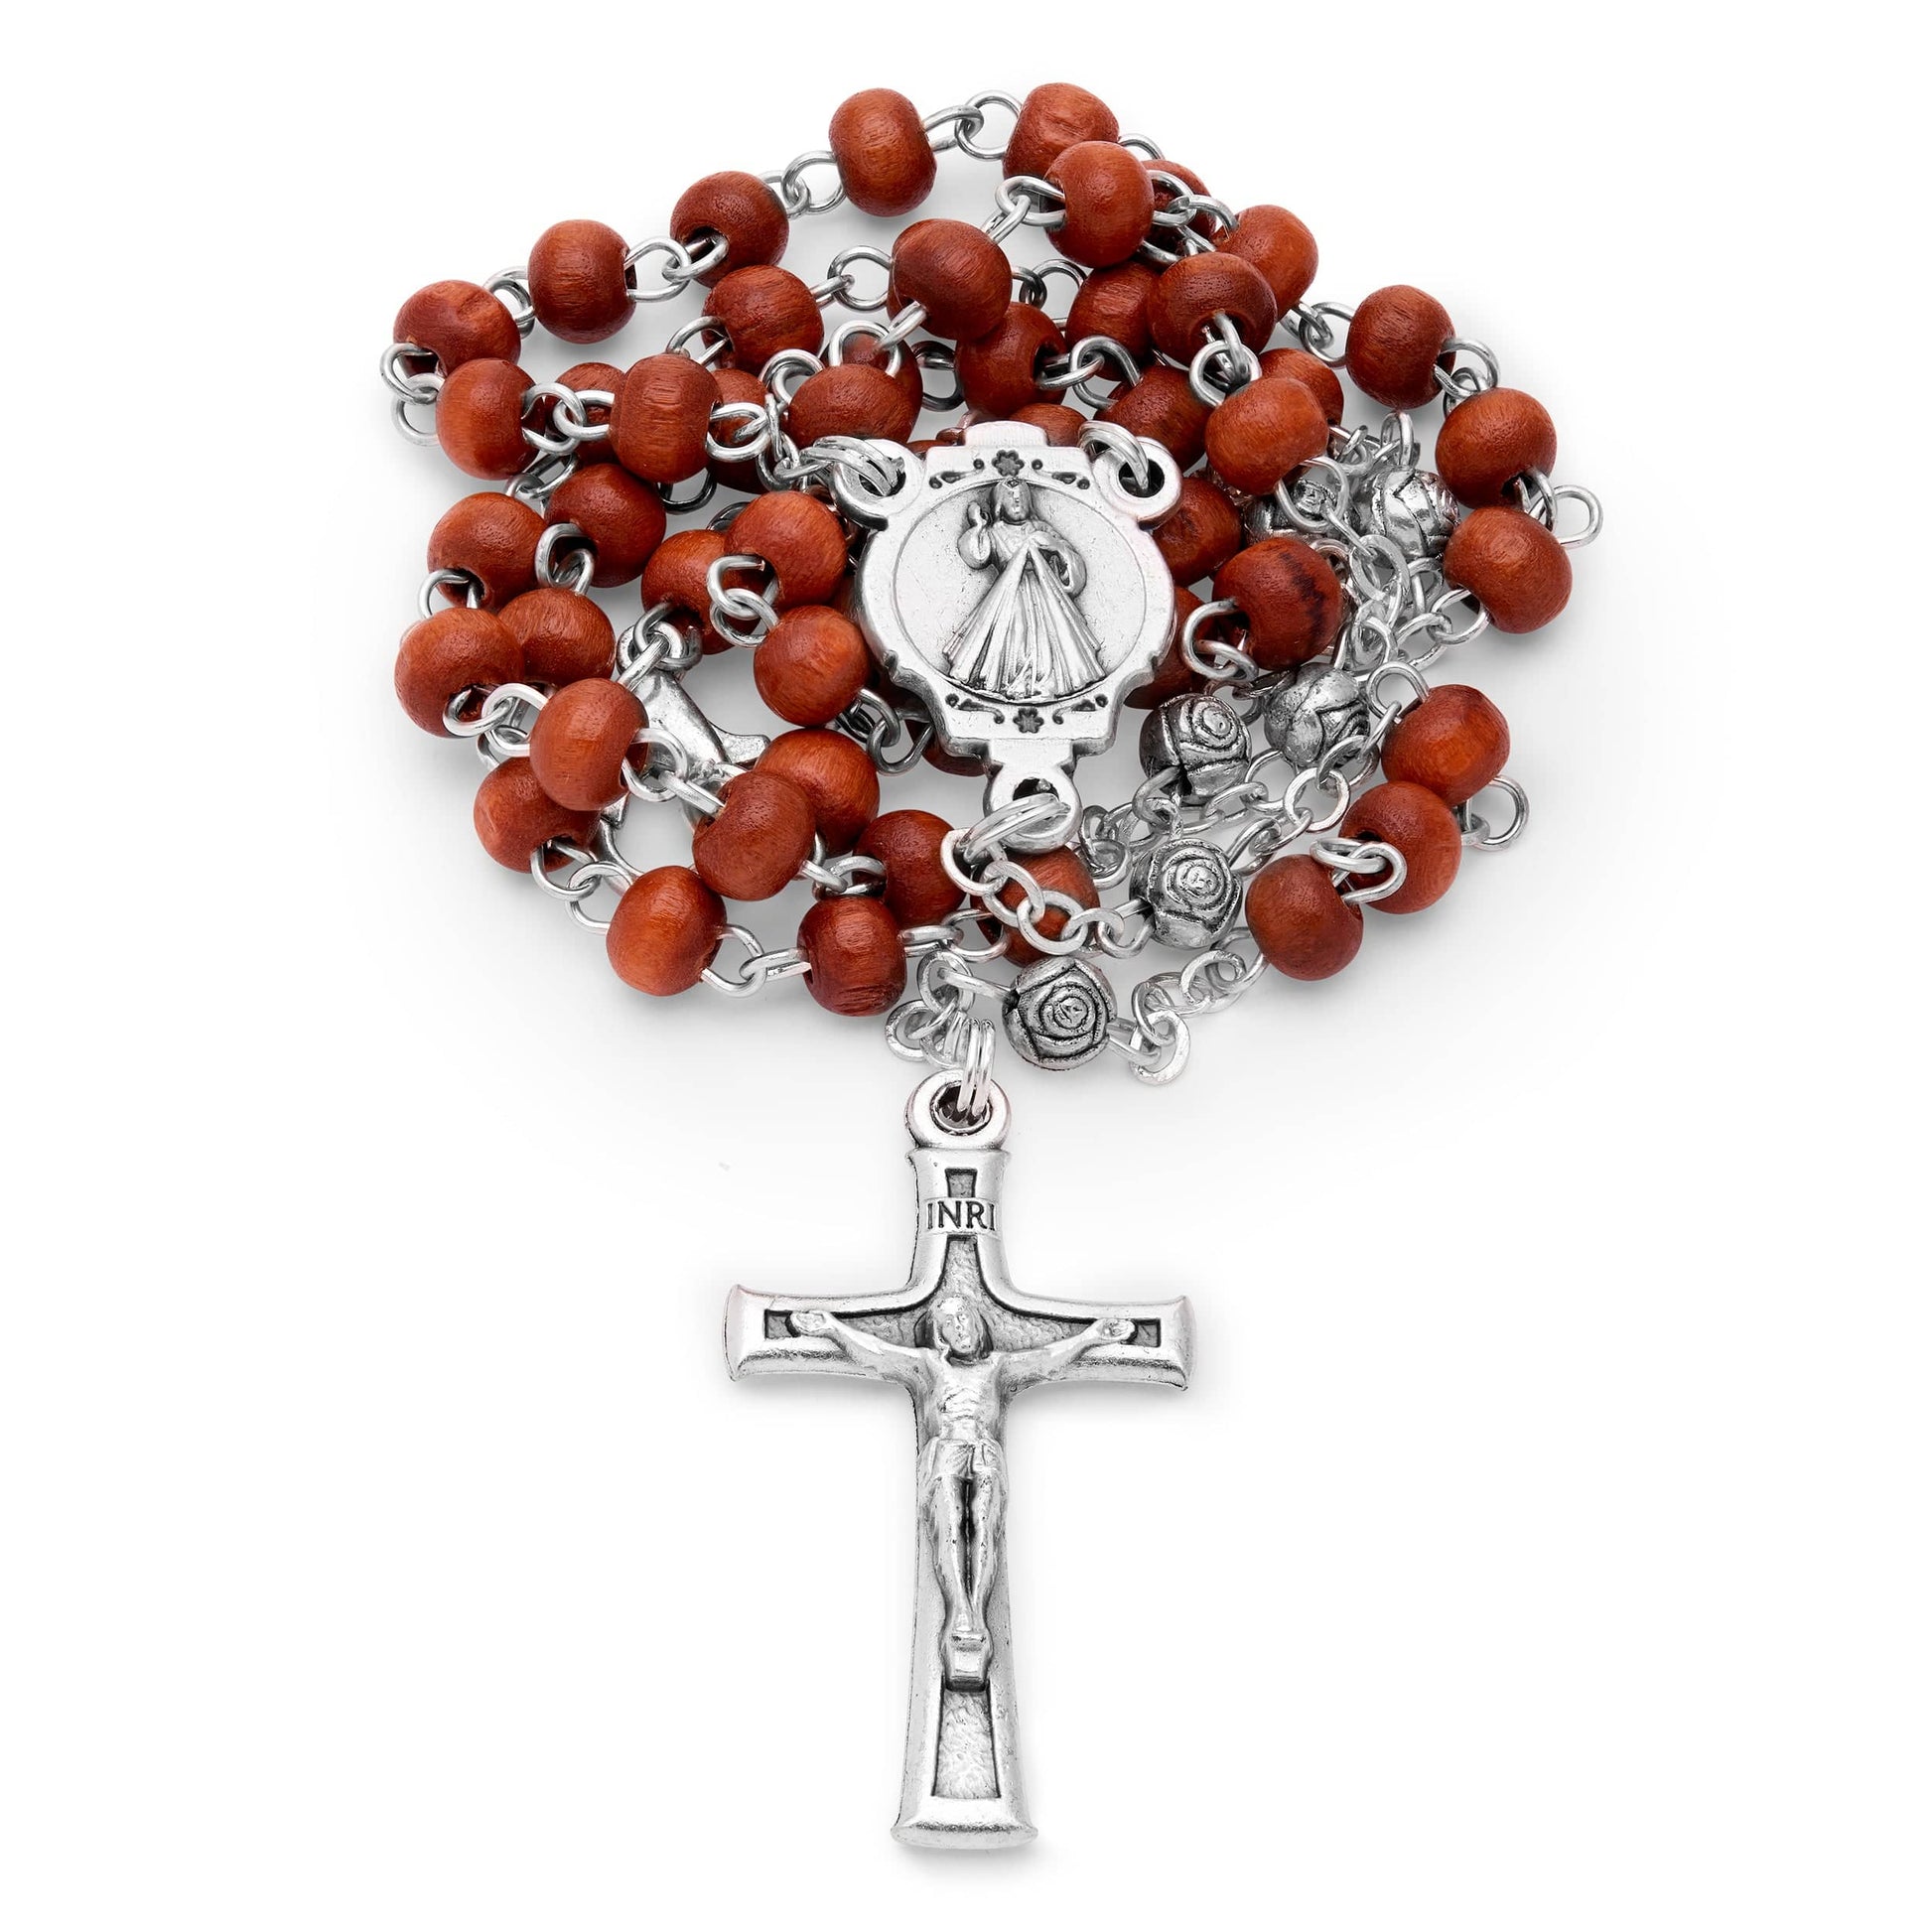 MONDO CATTOLICO Prayer Beads 38 cm (14.96 in) / 4 mm (0.16 in) Olive Wood Tiny Box and Rosary of Our Lady of Guadalupe